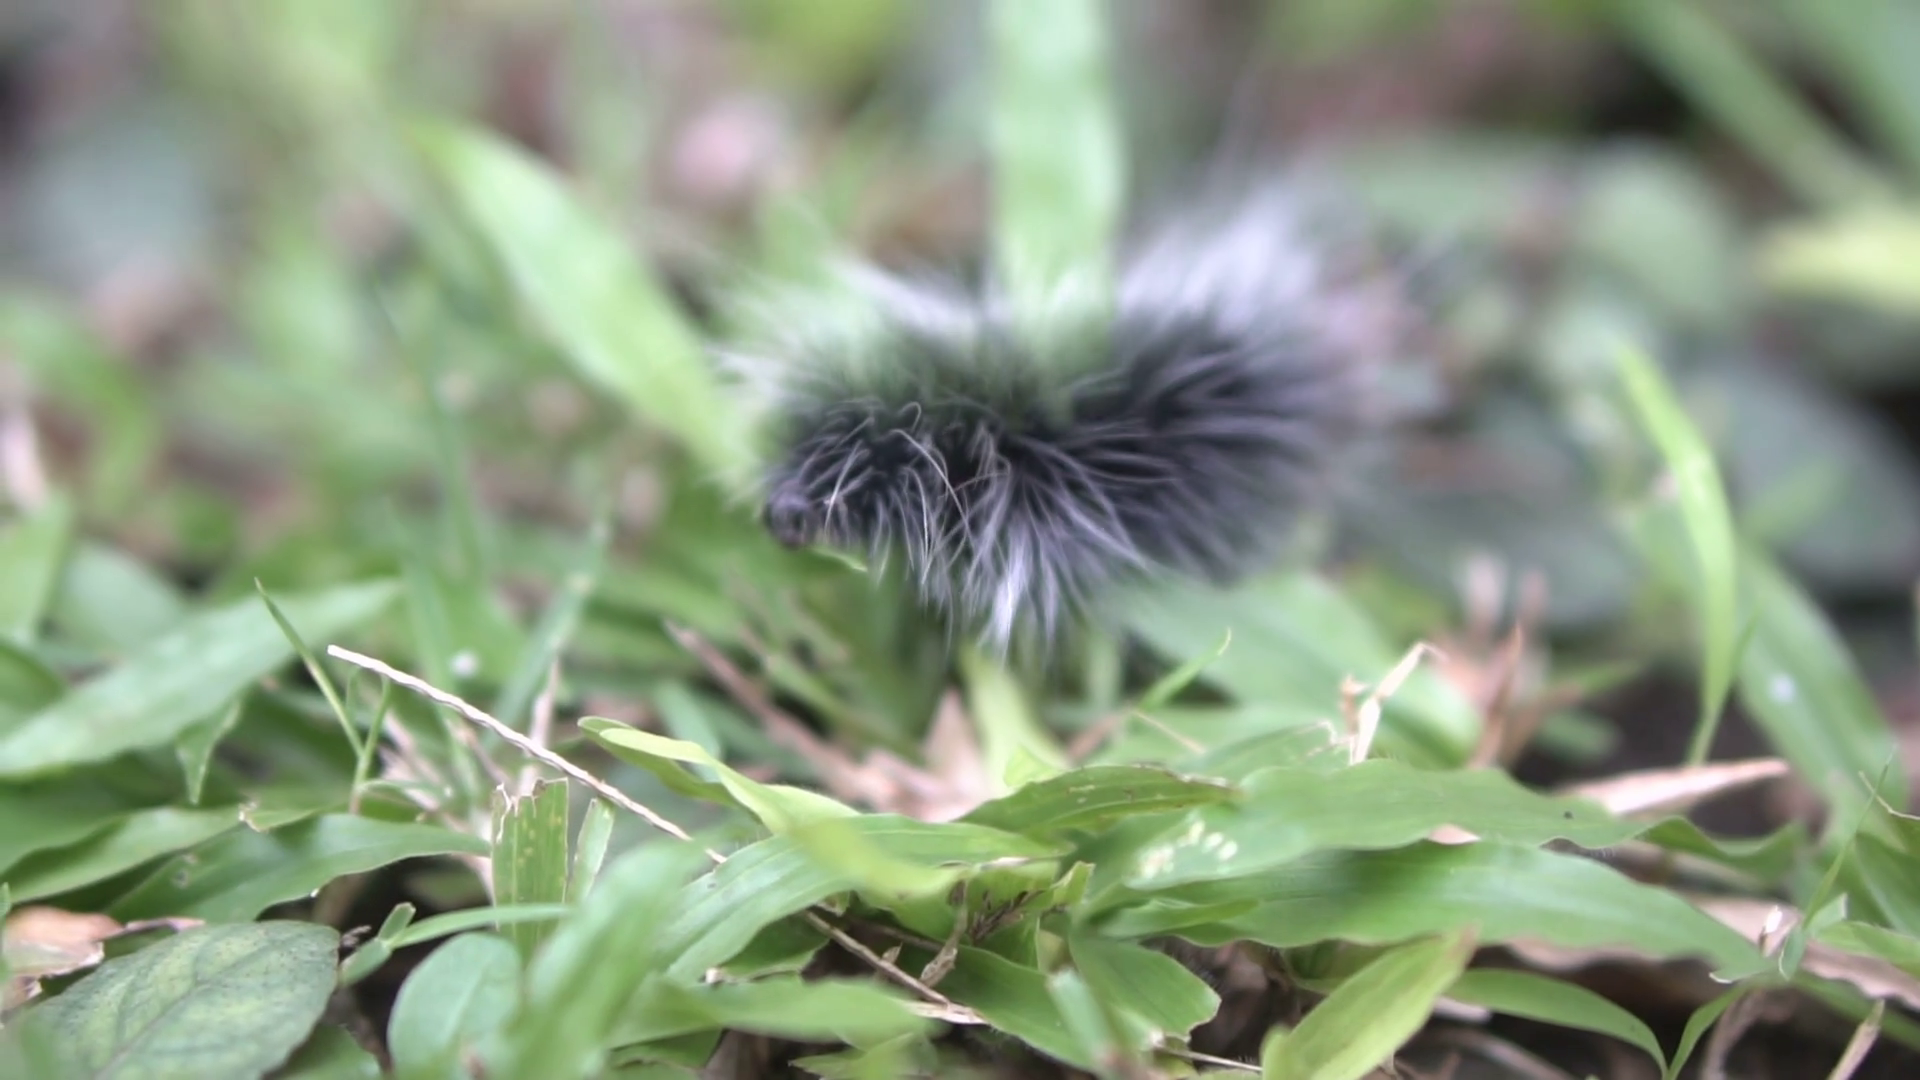 Beautiful black and white furry caterpillar crawling on the leaves ...